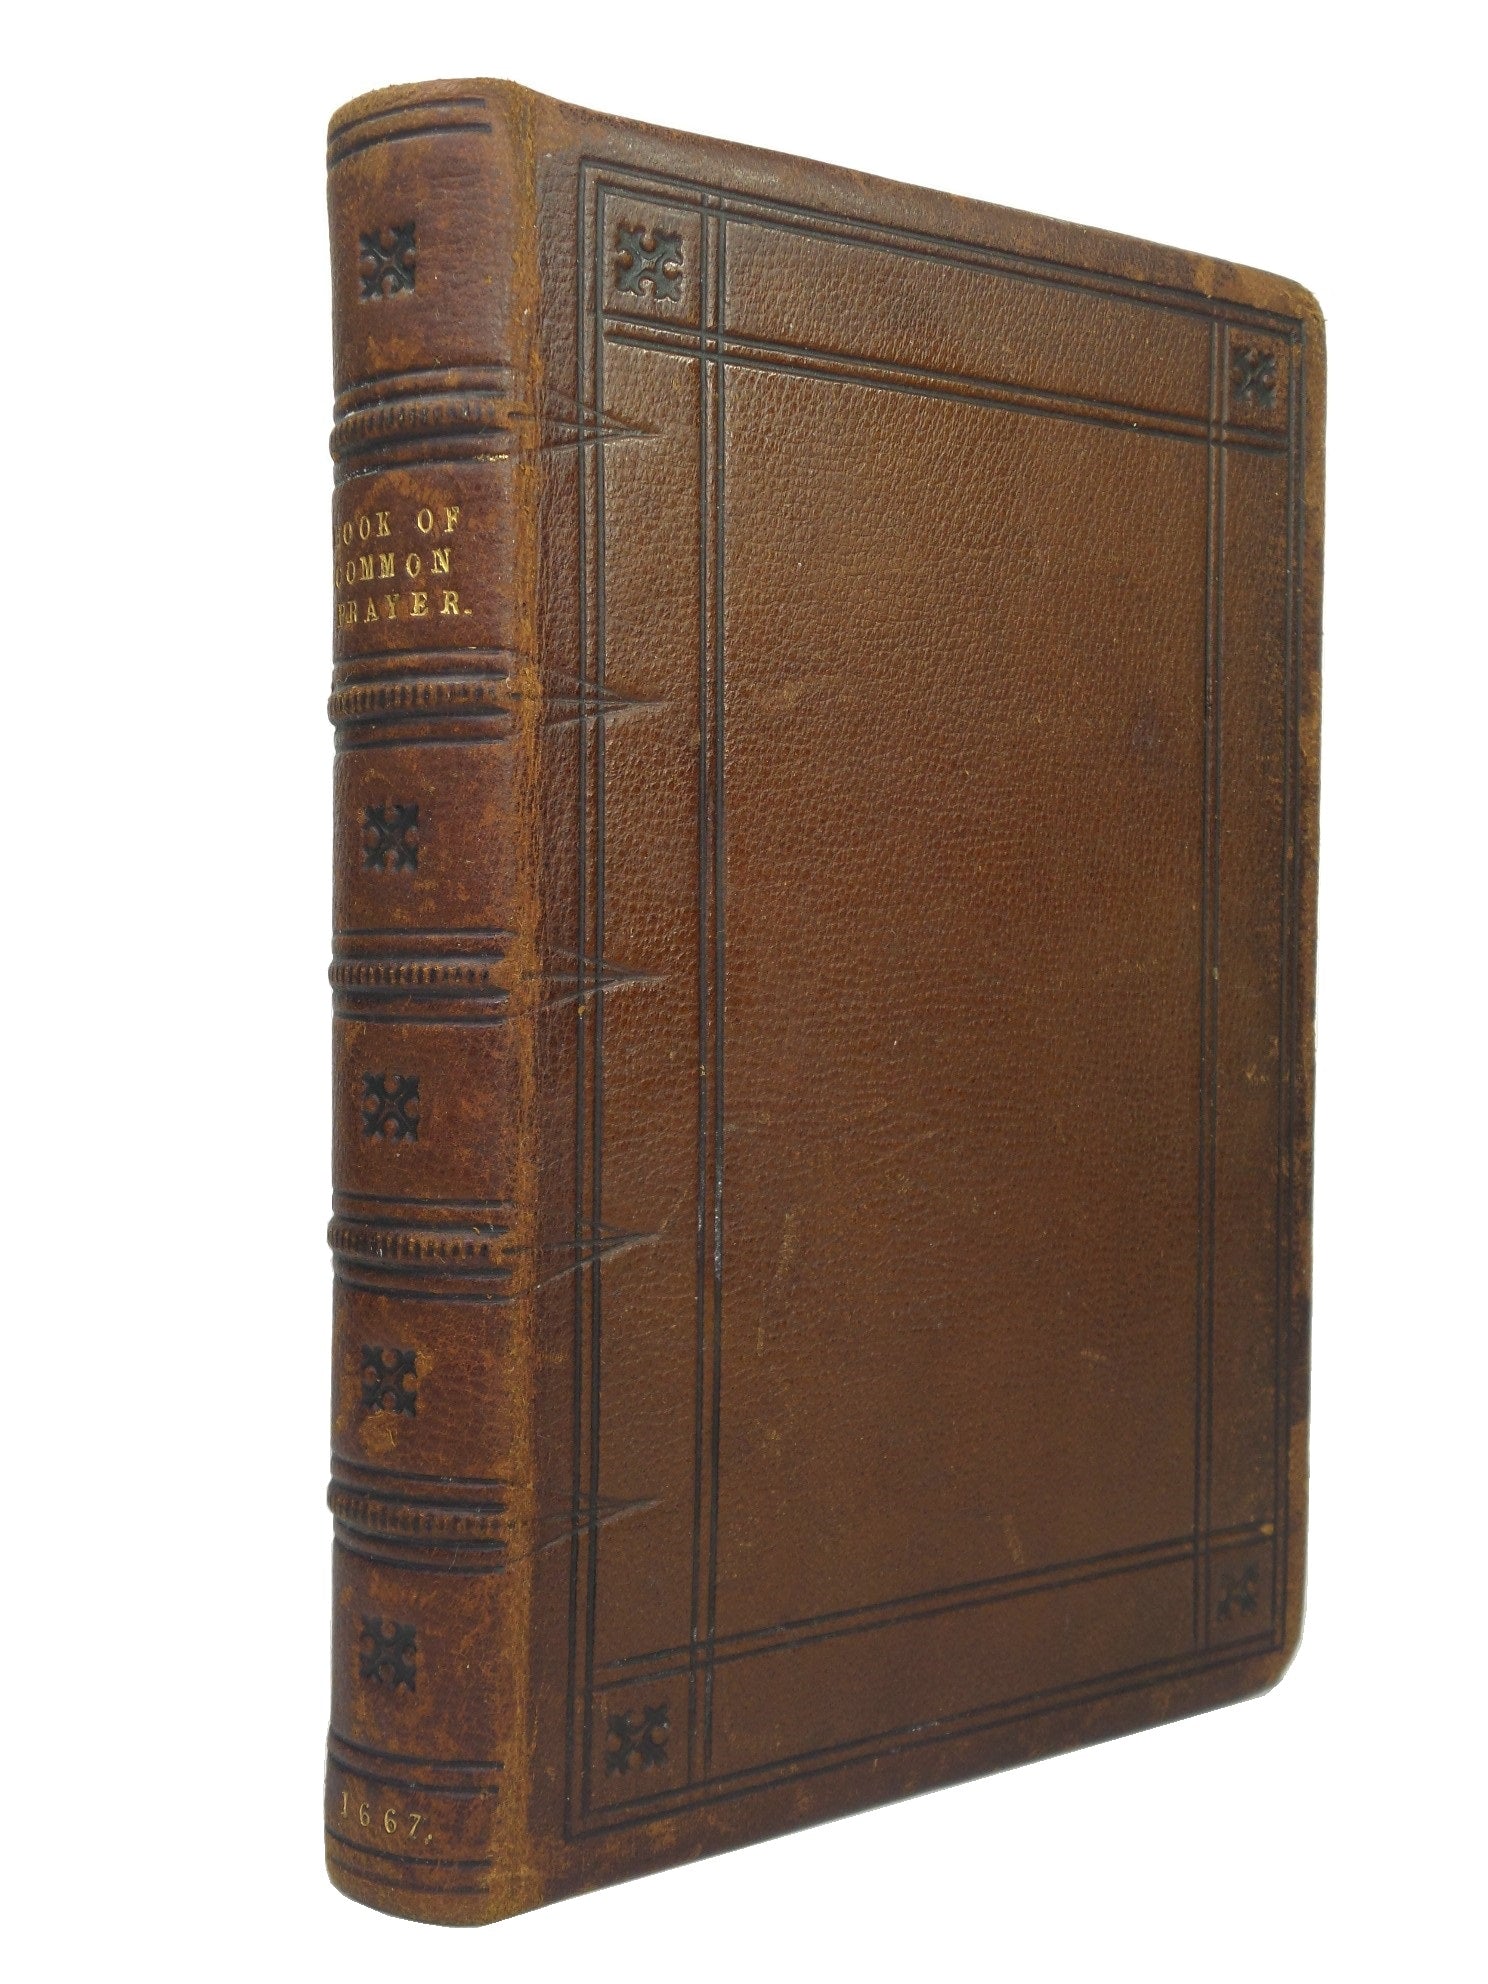 THE BOOK OF COMMON-PRAYER AND ADMINISTRATION OF THE SACRAMENTS 1667 FINE BINDING